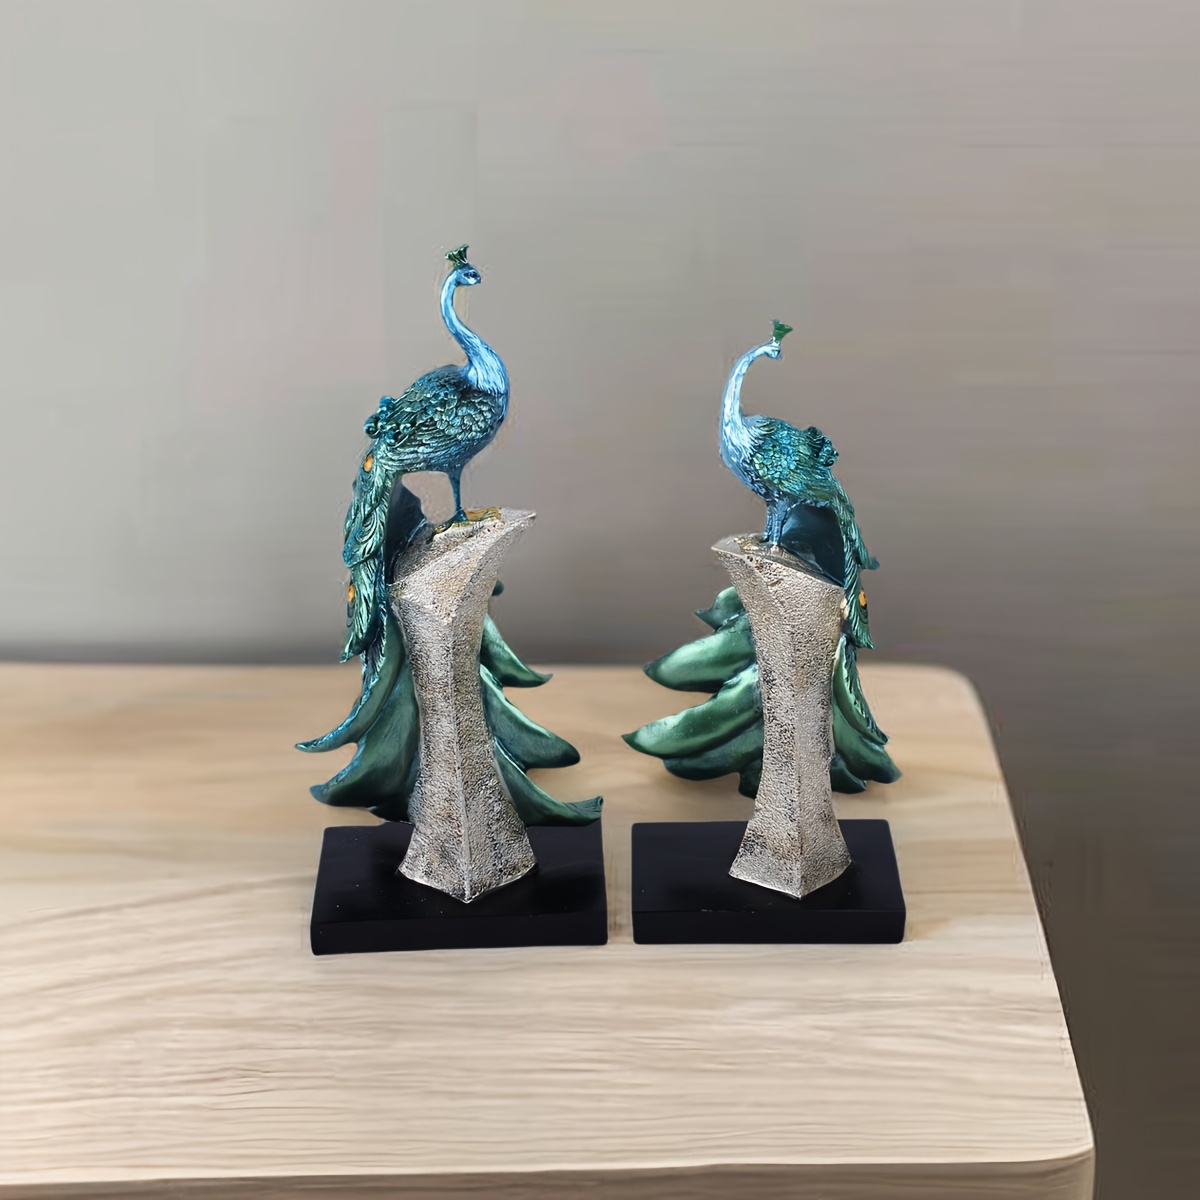 1pc, Peacock Figurines, 13.39 Inches Height, Resin Peacock Sculptures, Modern Creative Animal Home Decor, Tabletop Accent, Gold With Feather Details